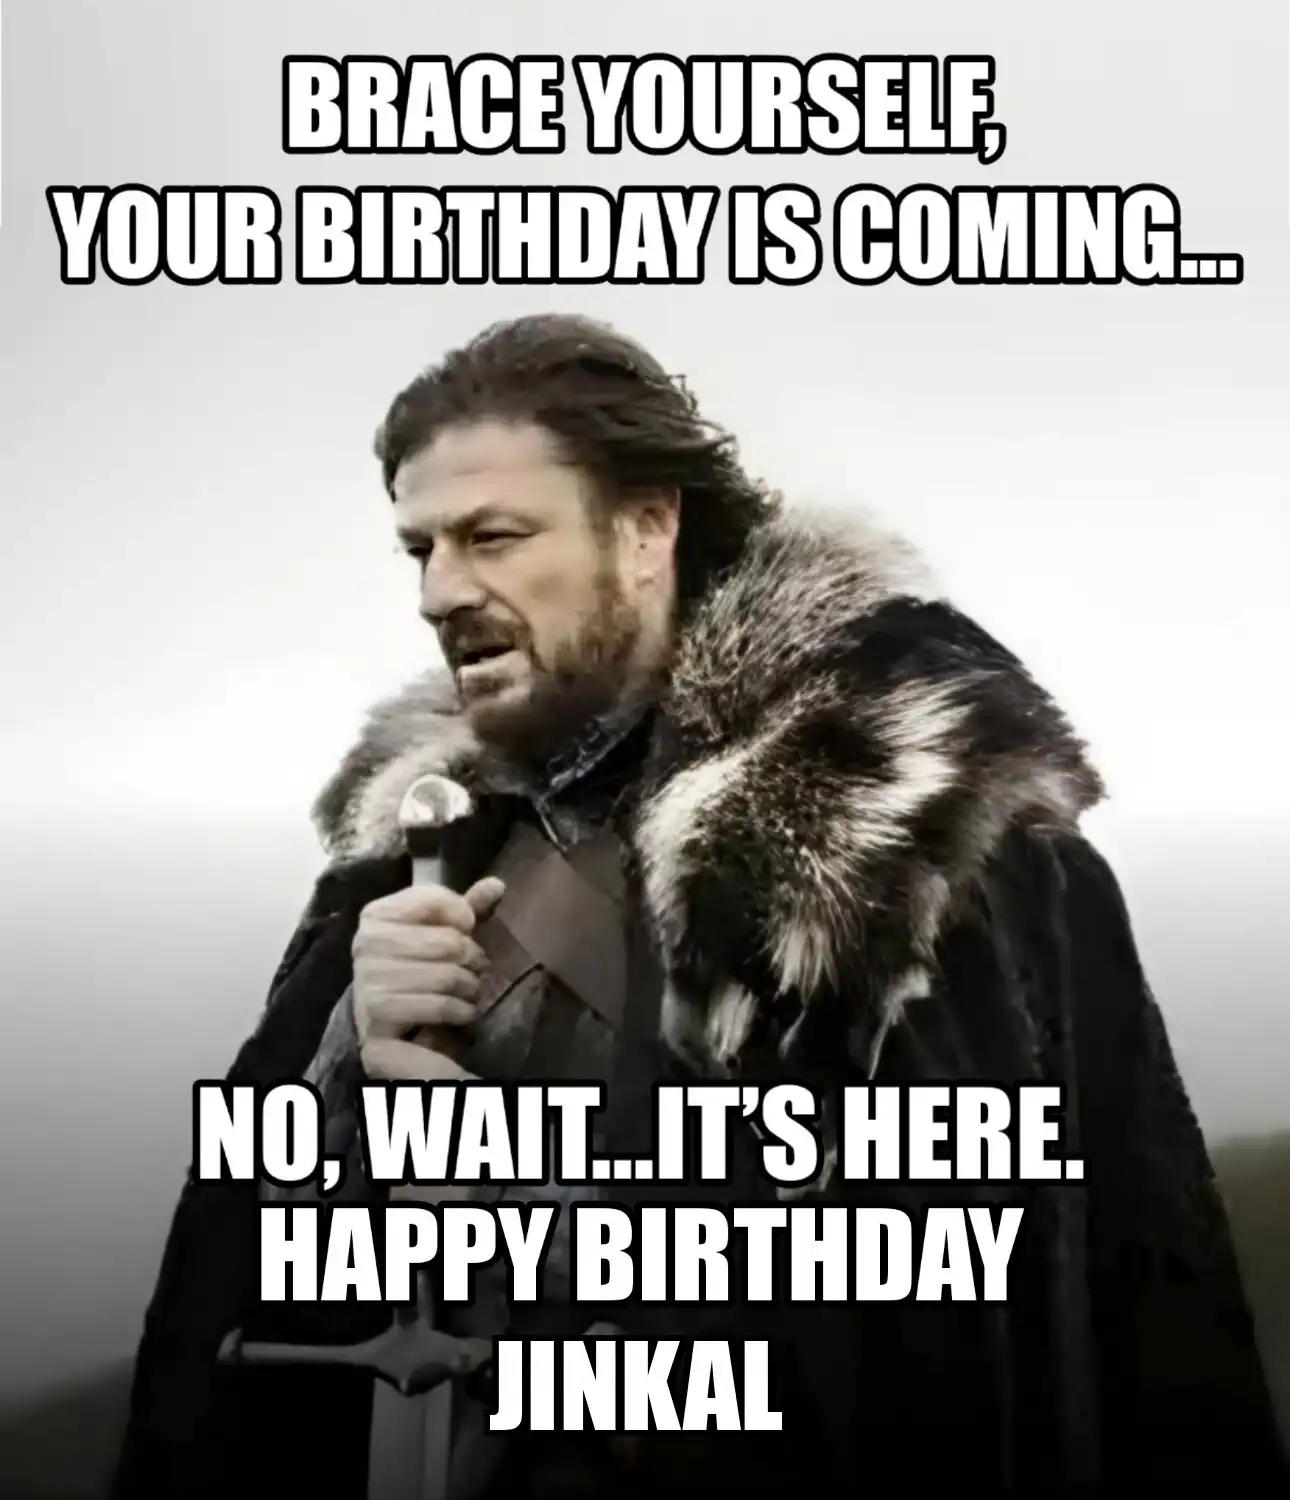 Happy Birthday Jinkal Brace Yourself Your Birthday Is Coming Meme